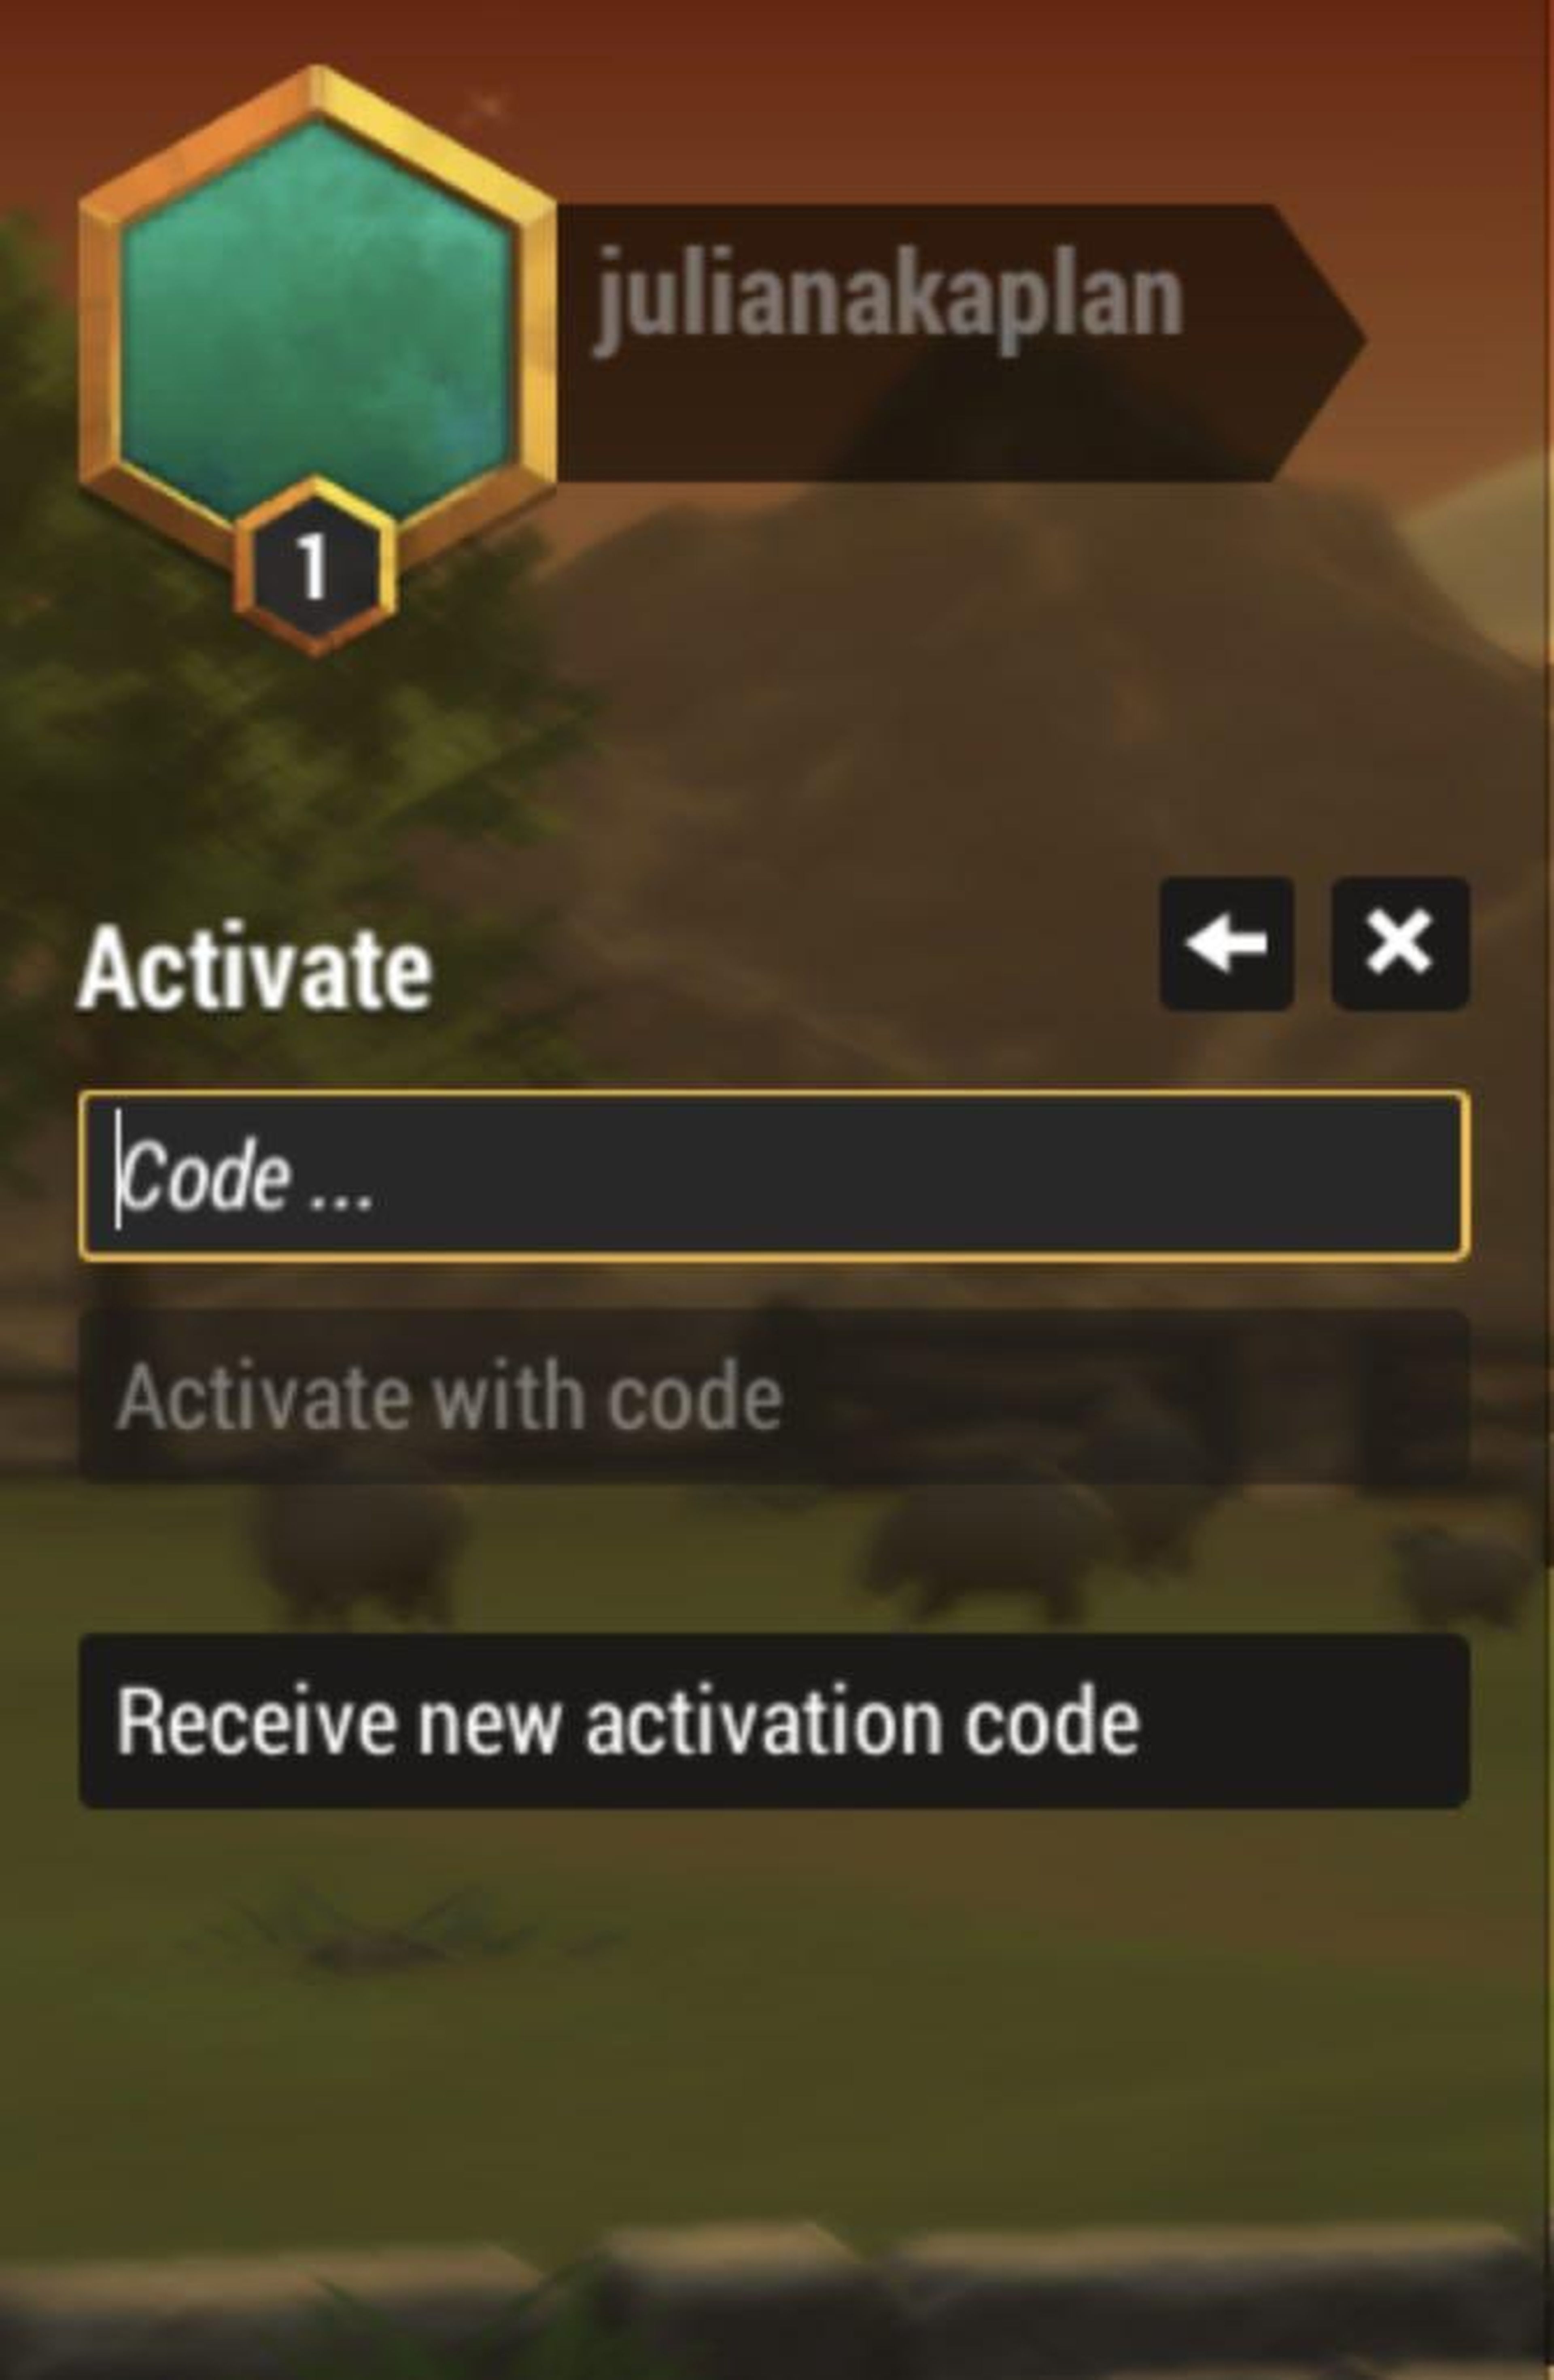 The activation code screen.